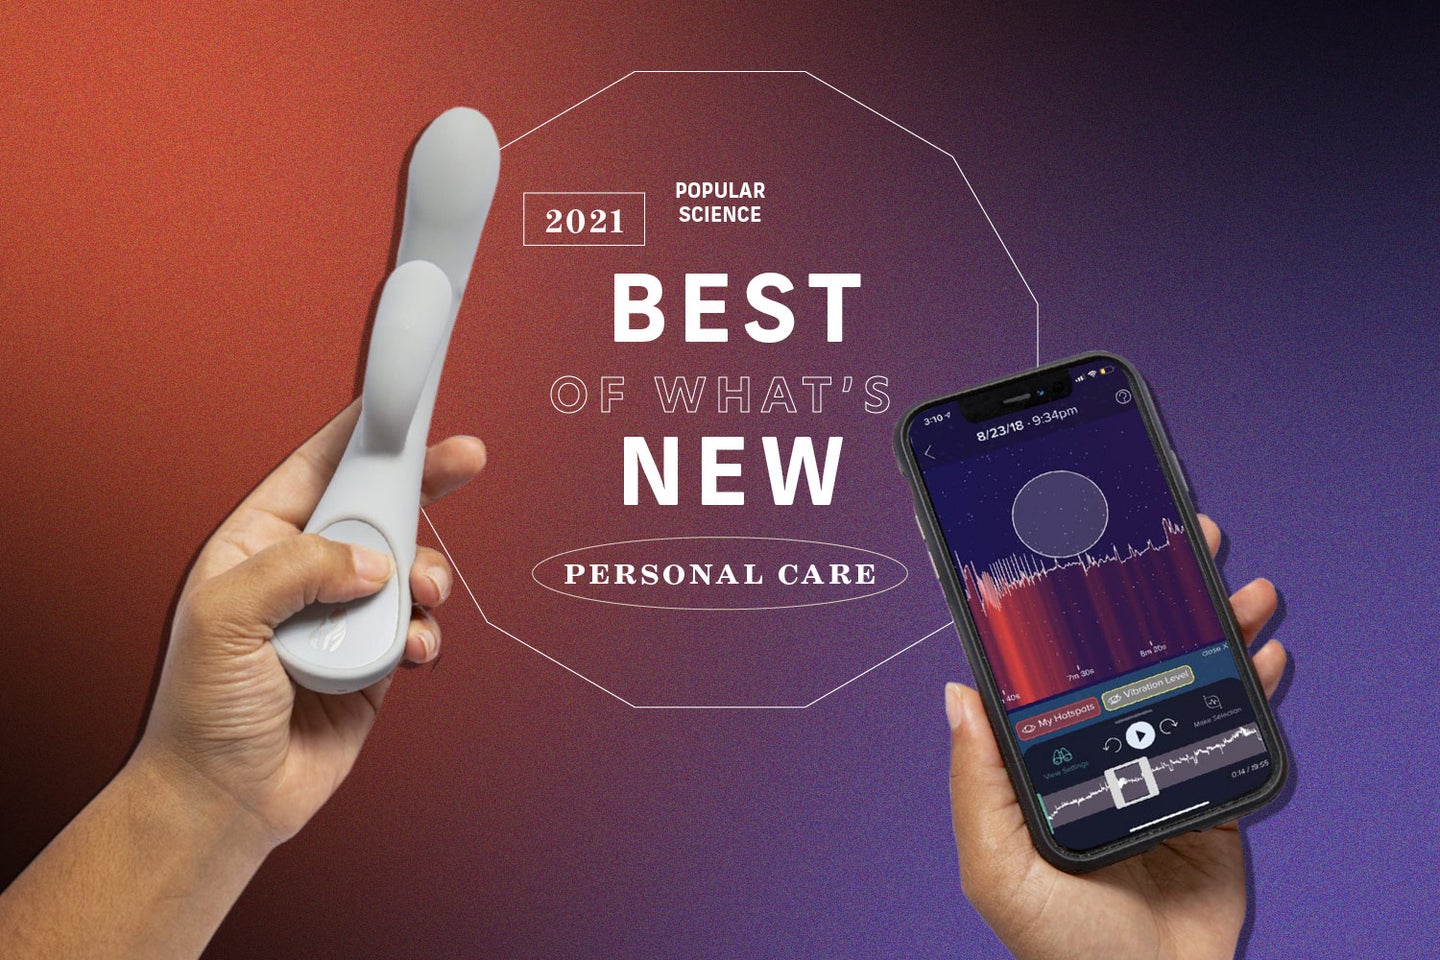 a hand holding a vibrator and a phone over the text "Best of what's new"